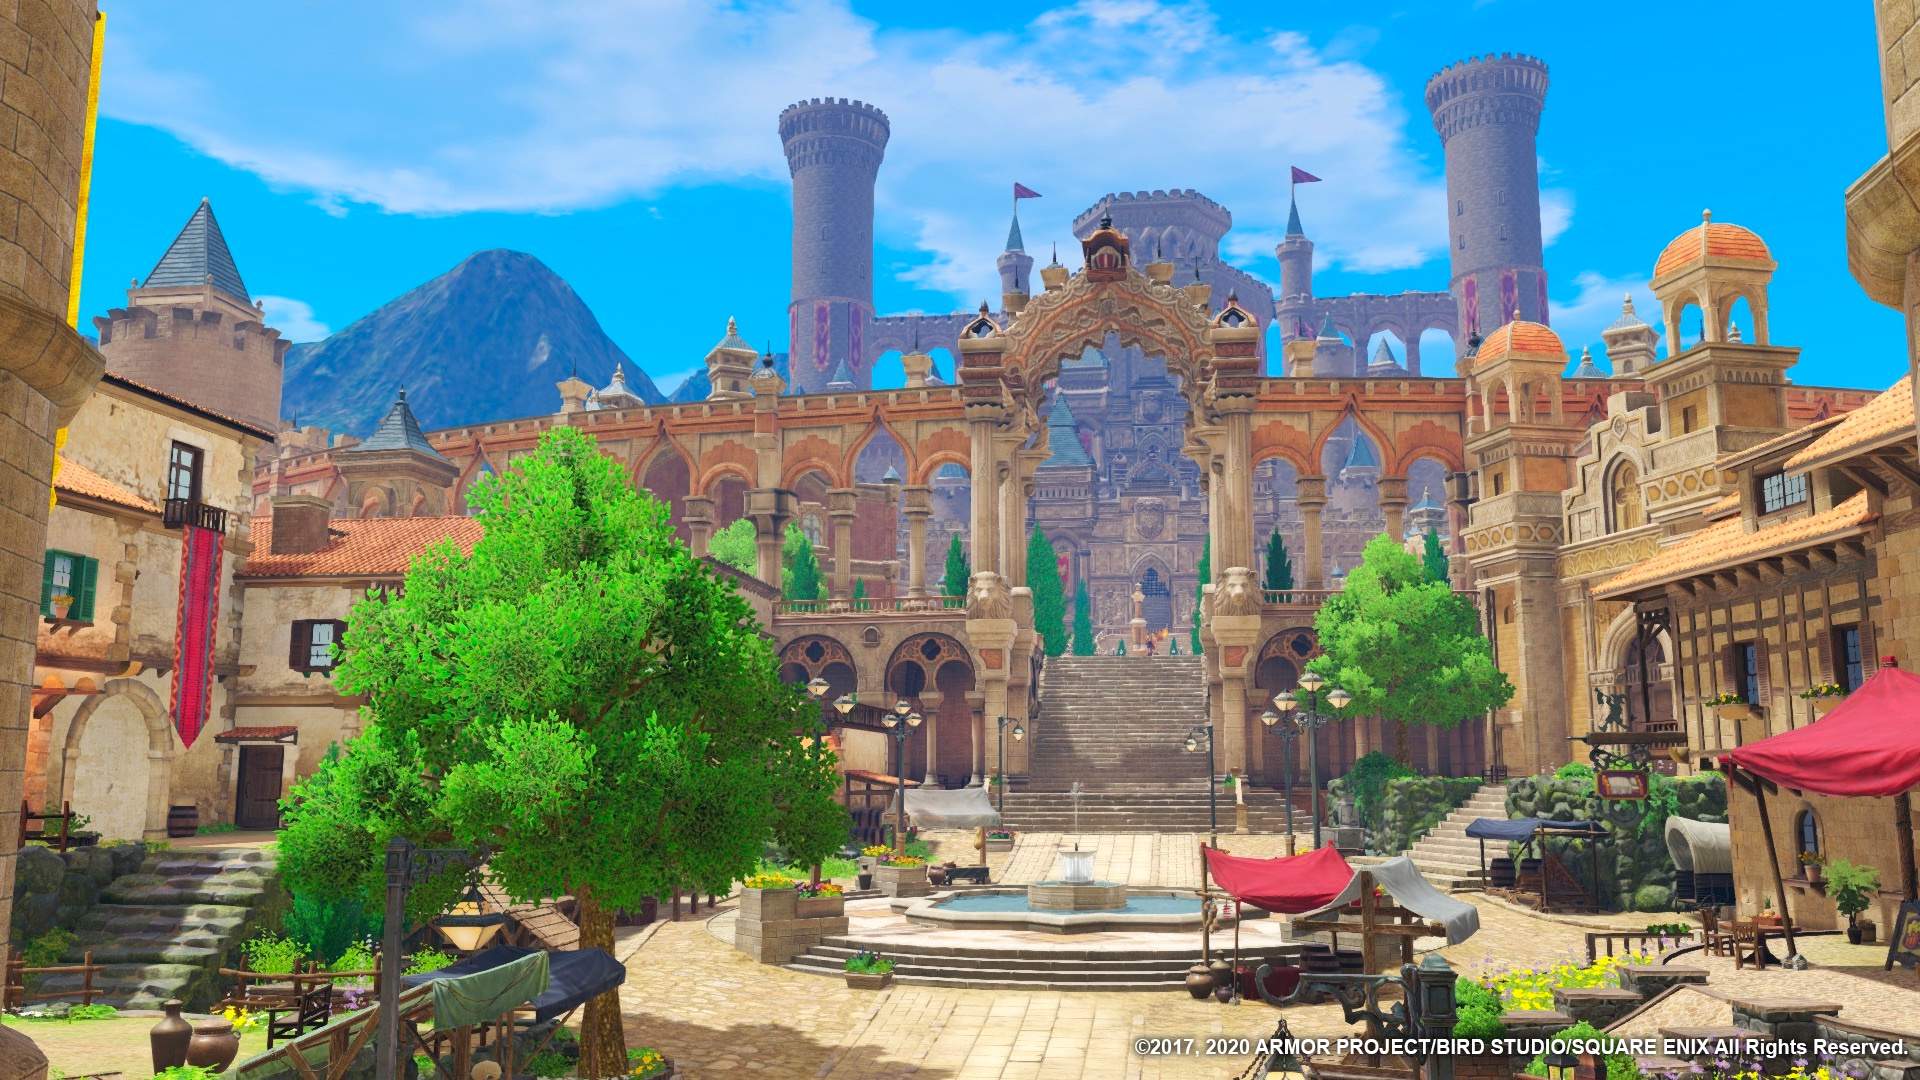 Dragon Quest Xi S How We Built The Definitive Edition In 3d And 2d Square Enix Blog